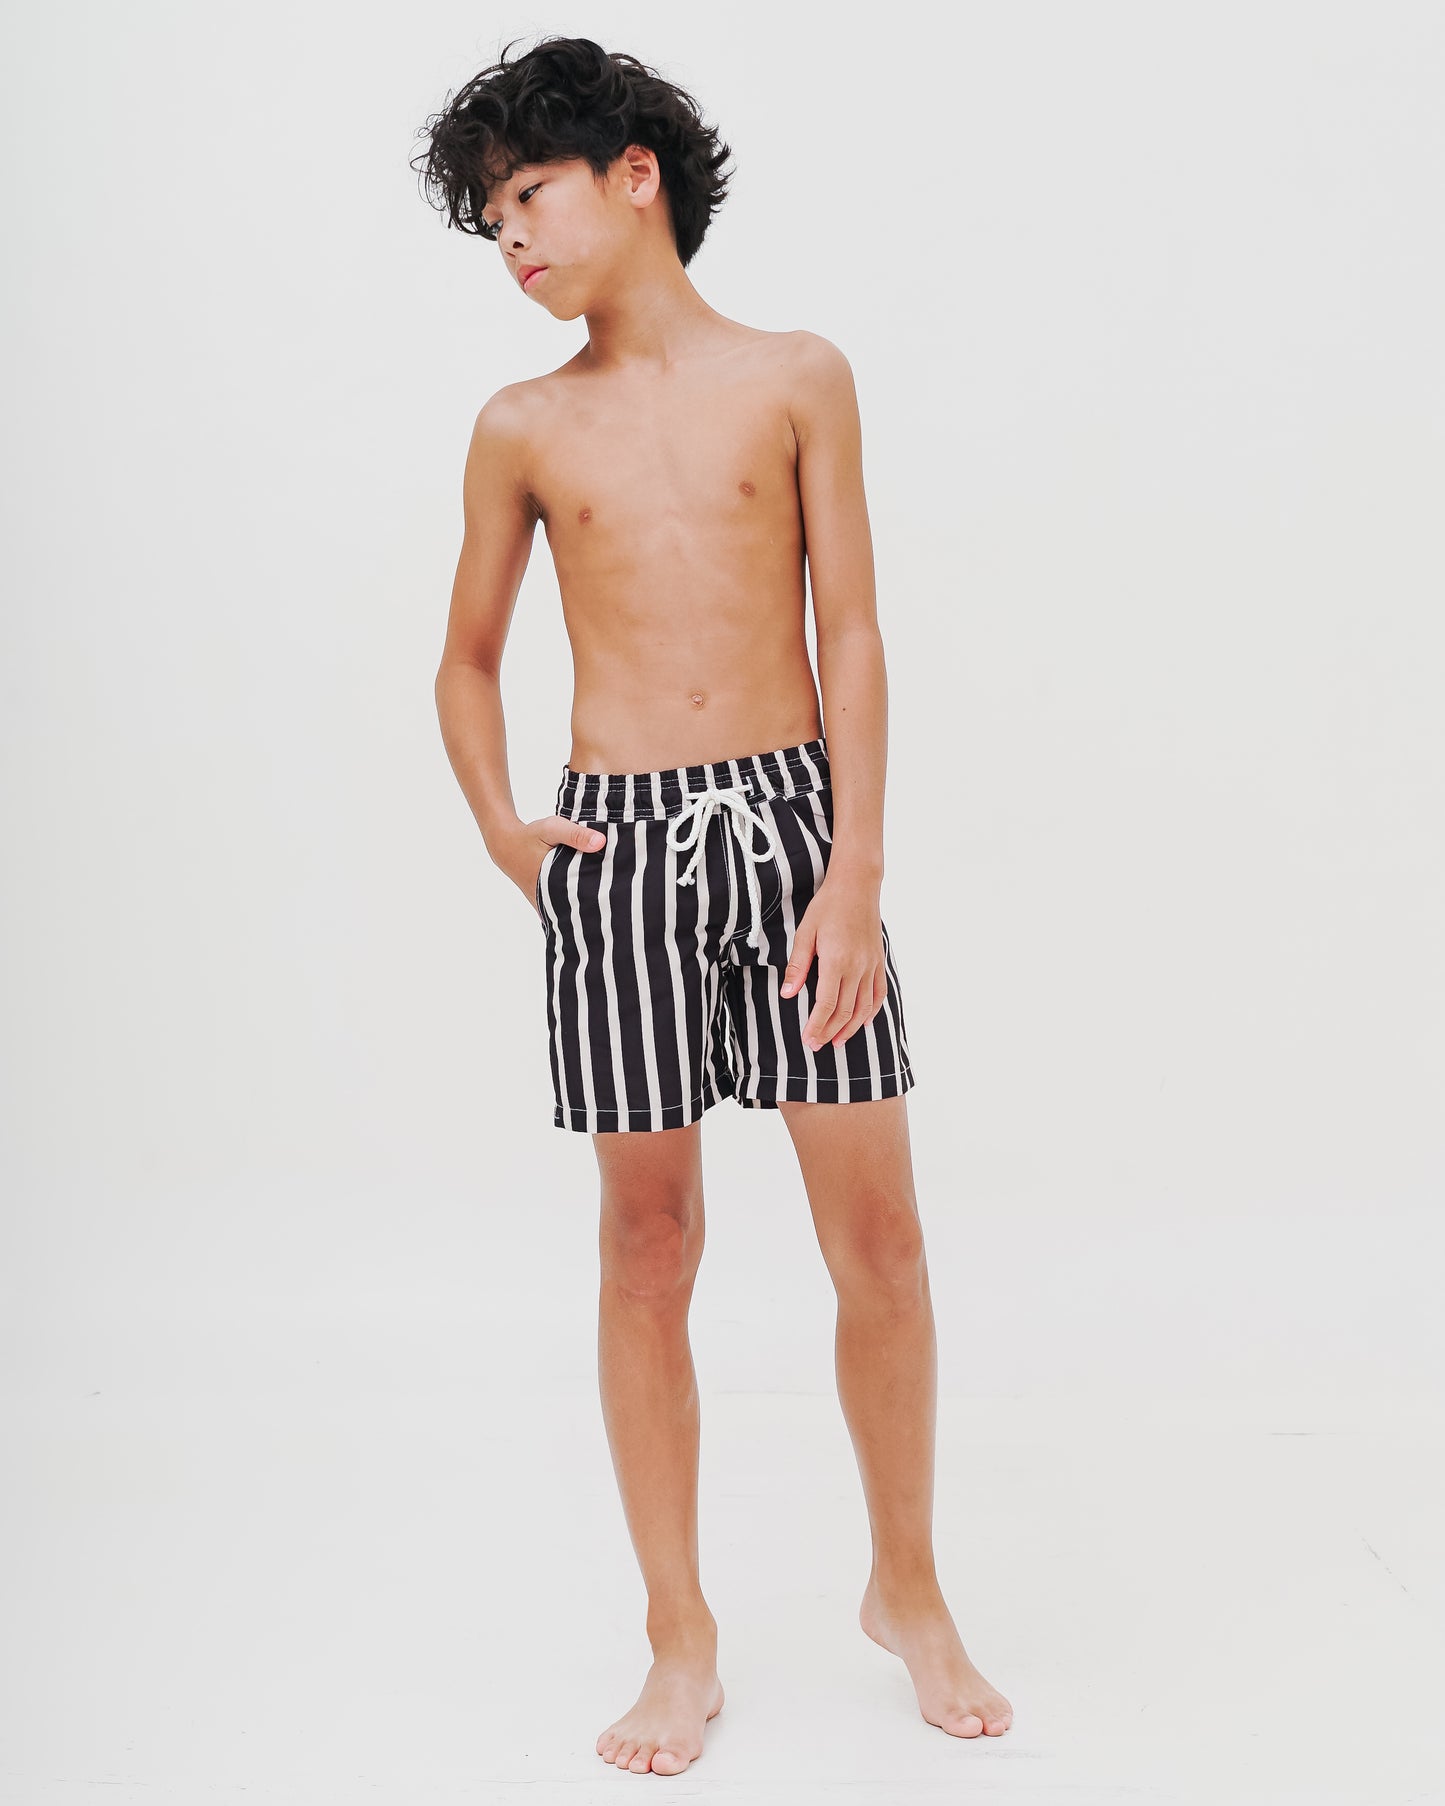 Load image into Gallery viewer, Boys Swim Shorts - Tom
